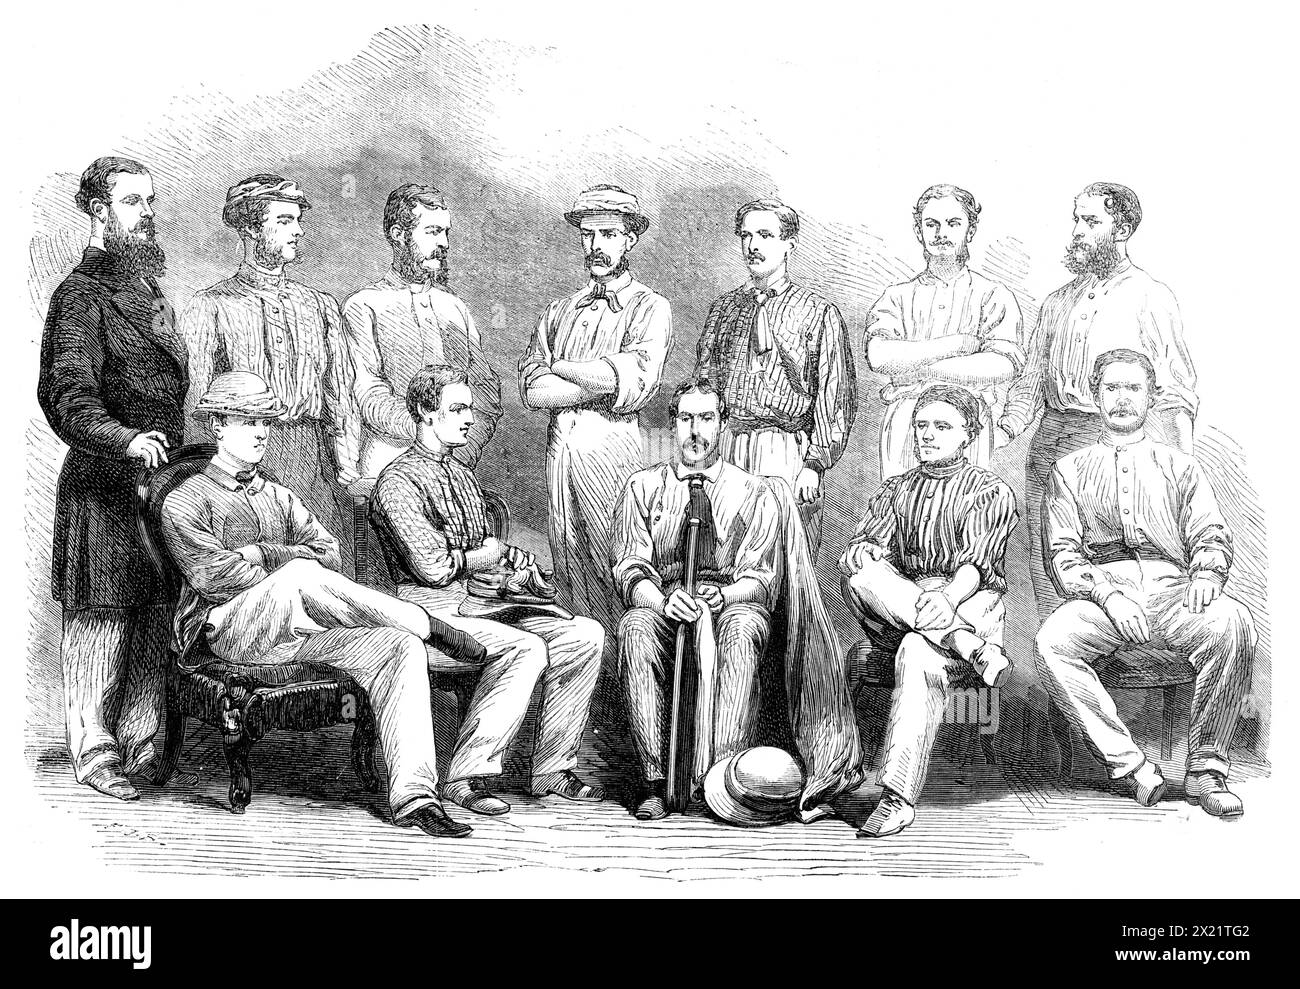 The cricket-match between Madras and Calcutta: the Madras Eleven, 1864. Engraving from a photograph by Mr. B. Smith, of the '...portraits of eleven members of the Madras Cricket Club who lately went to Calcutta to play against the Calcutta Cricket Club. Attempts had been made in previous years to bring the two elevens together, but were discountenanced by the absurd notion...that a good seat in the saddle or a good hit to square leg is evidence of an idle disposition in the members of the civil service. It required some courage to make the announcement that eleven men wanted permission to leav Stock Photo